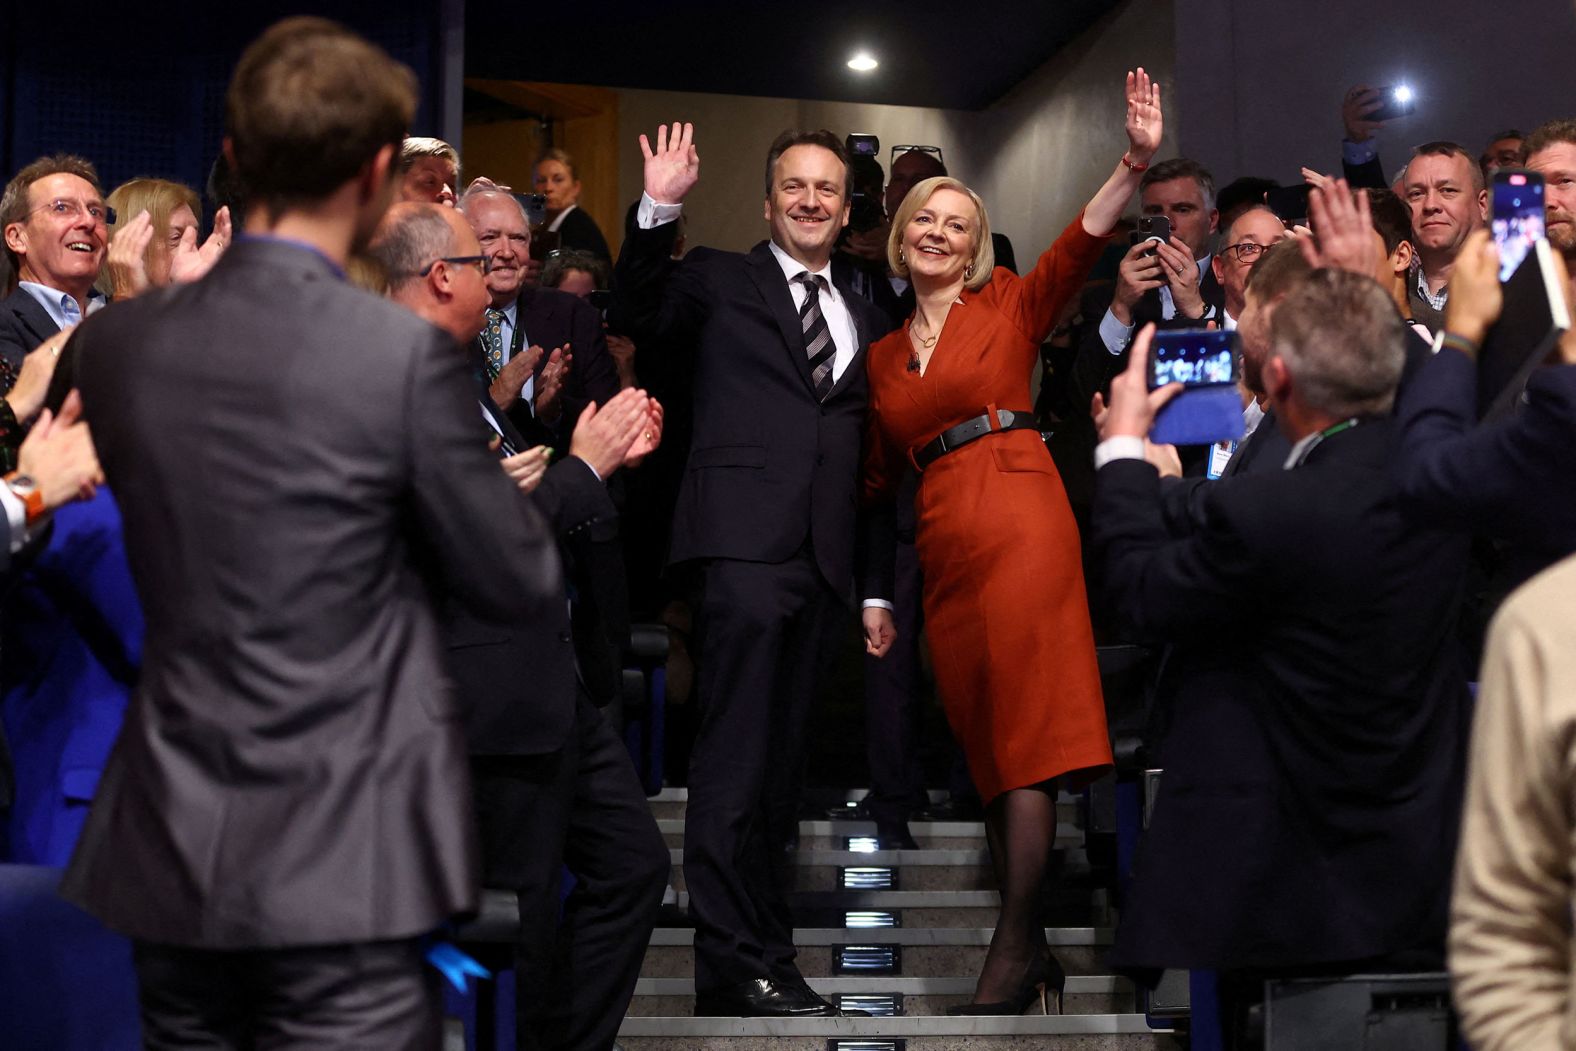 British Prime Minister Liz Truss and her husband, Hugh O'Learyat, wave during <a href="https://www.cnn.com/2022/10/05/uk/liz-truss-conservative-party-conference-speech-gbr-intl" target="_blank">the Conservative party's annual conference</a> in Birmingham, England, on Wednesday, October 5.